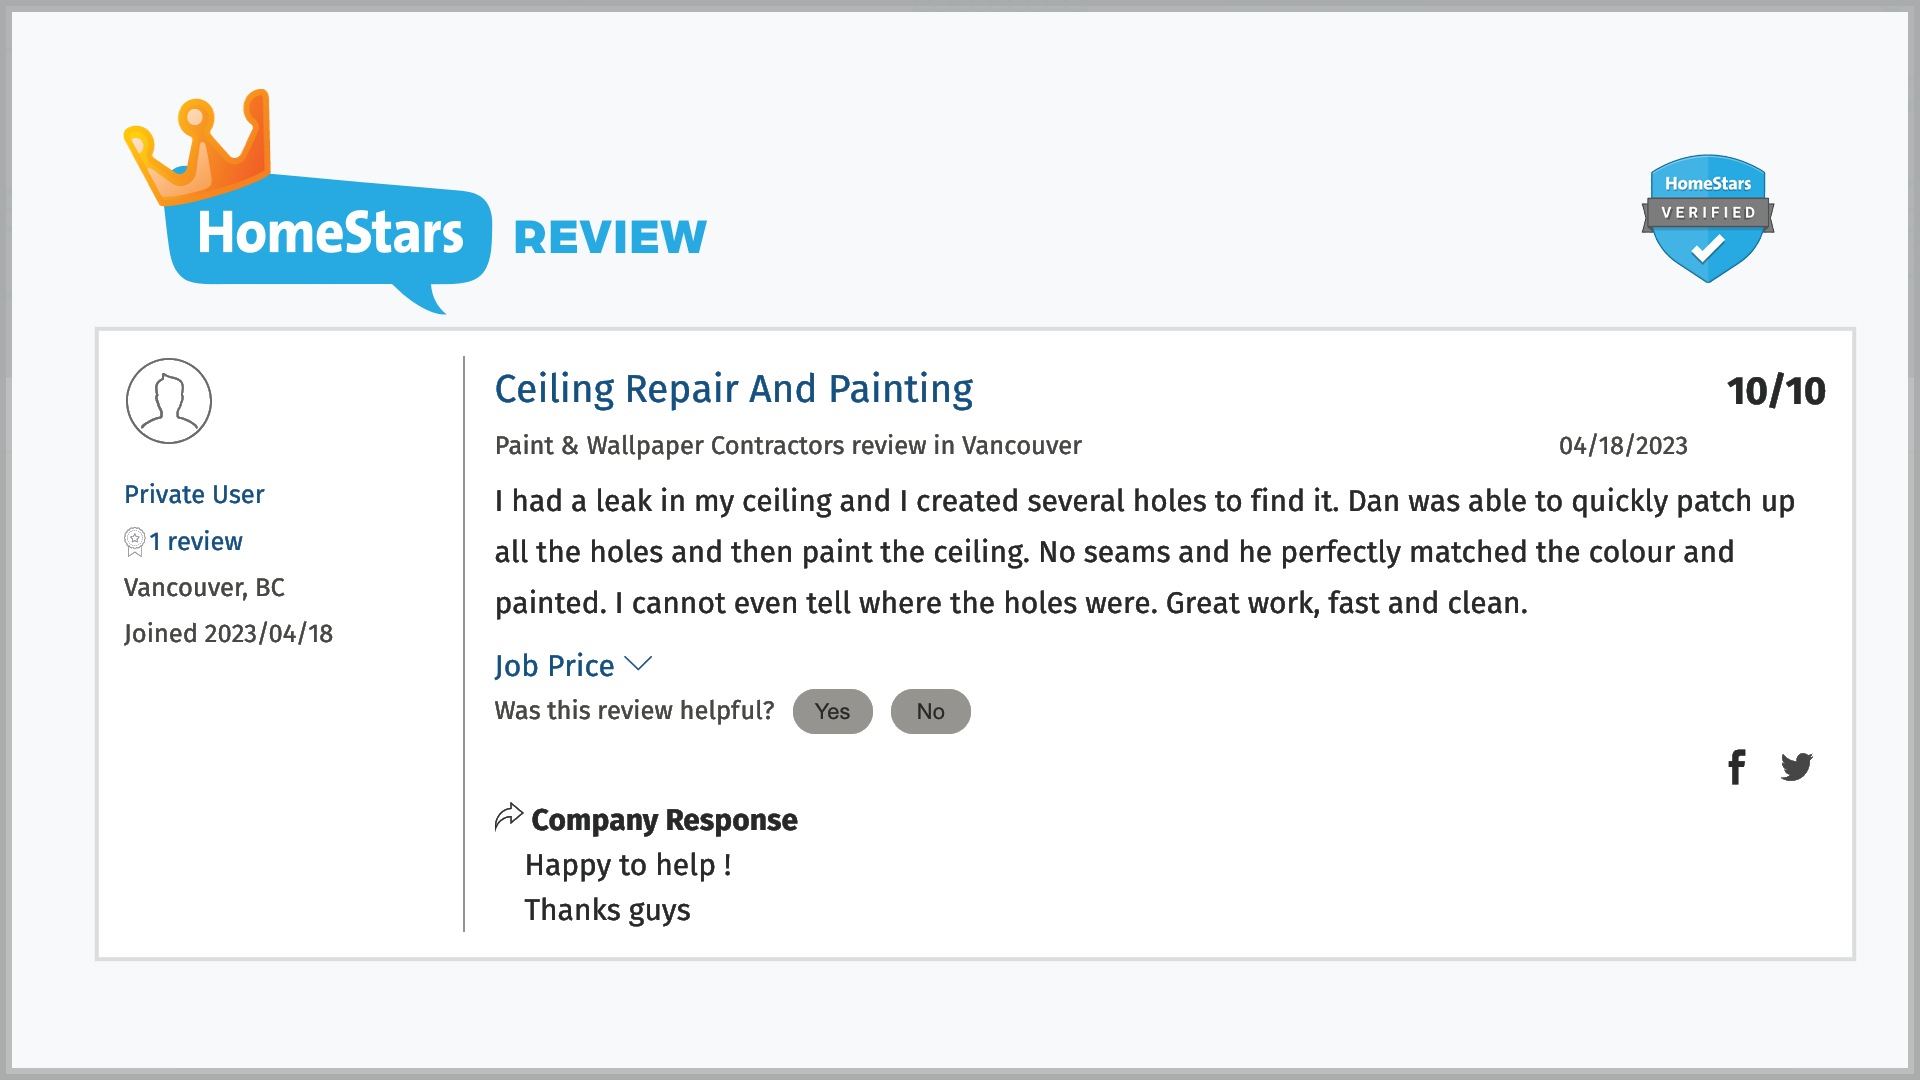 homestars-review-10-out-of-10-drywall-repairman-vancouver-bc-canada-4